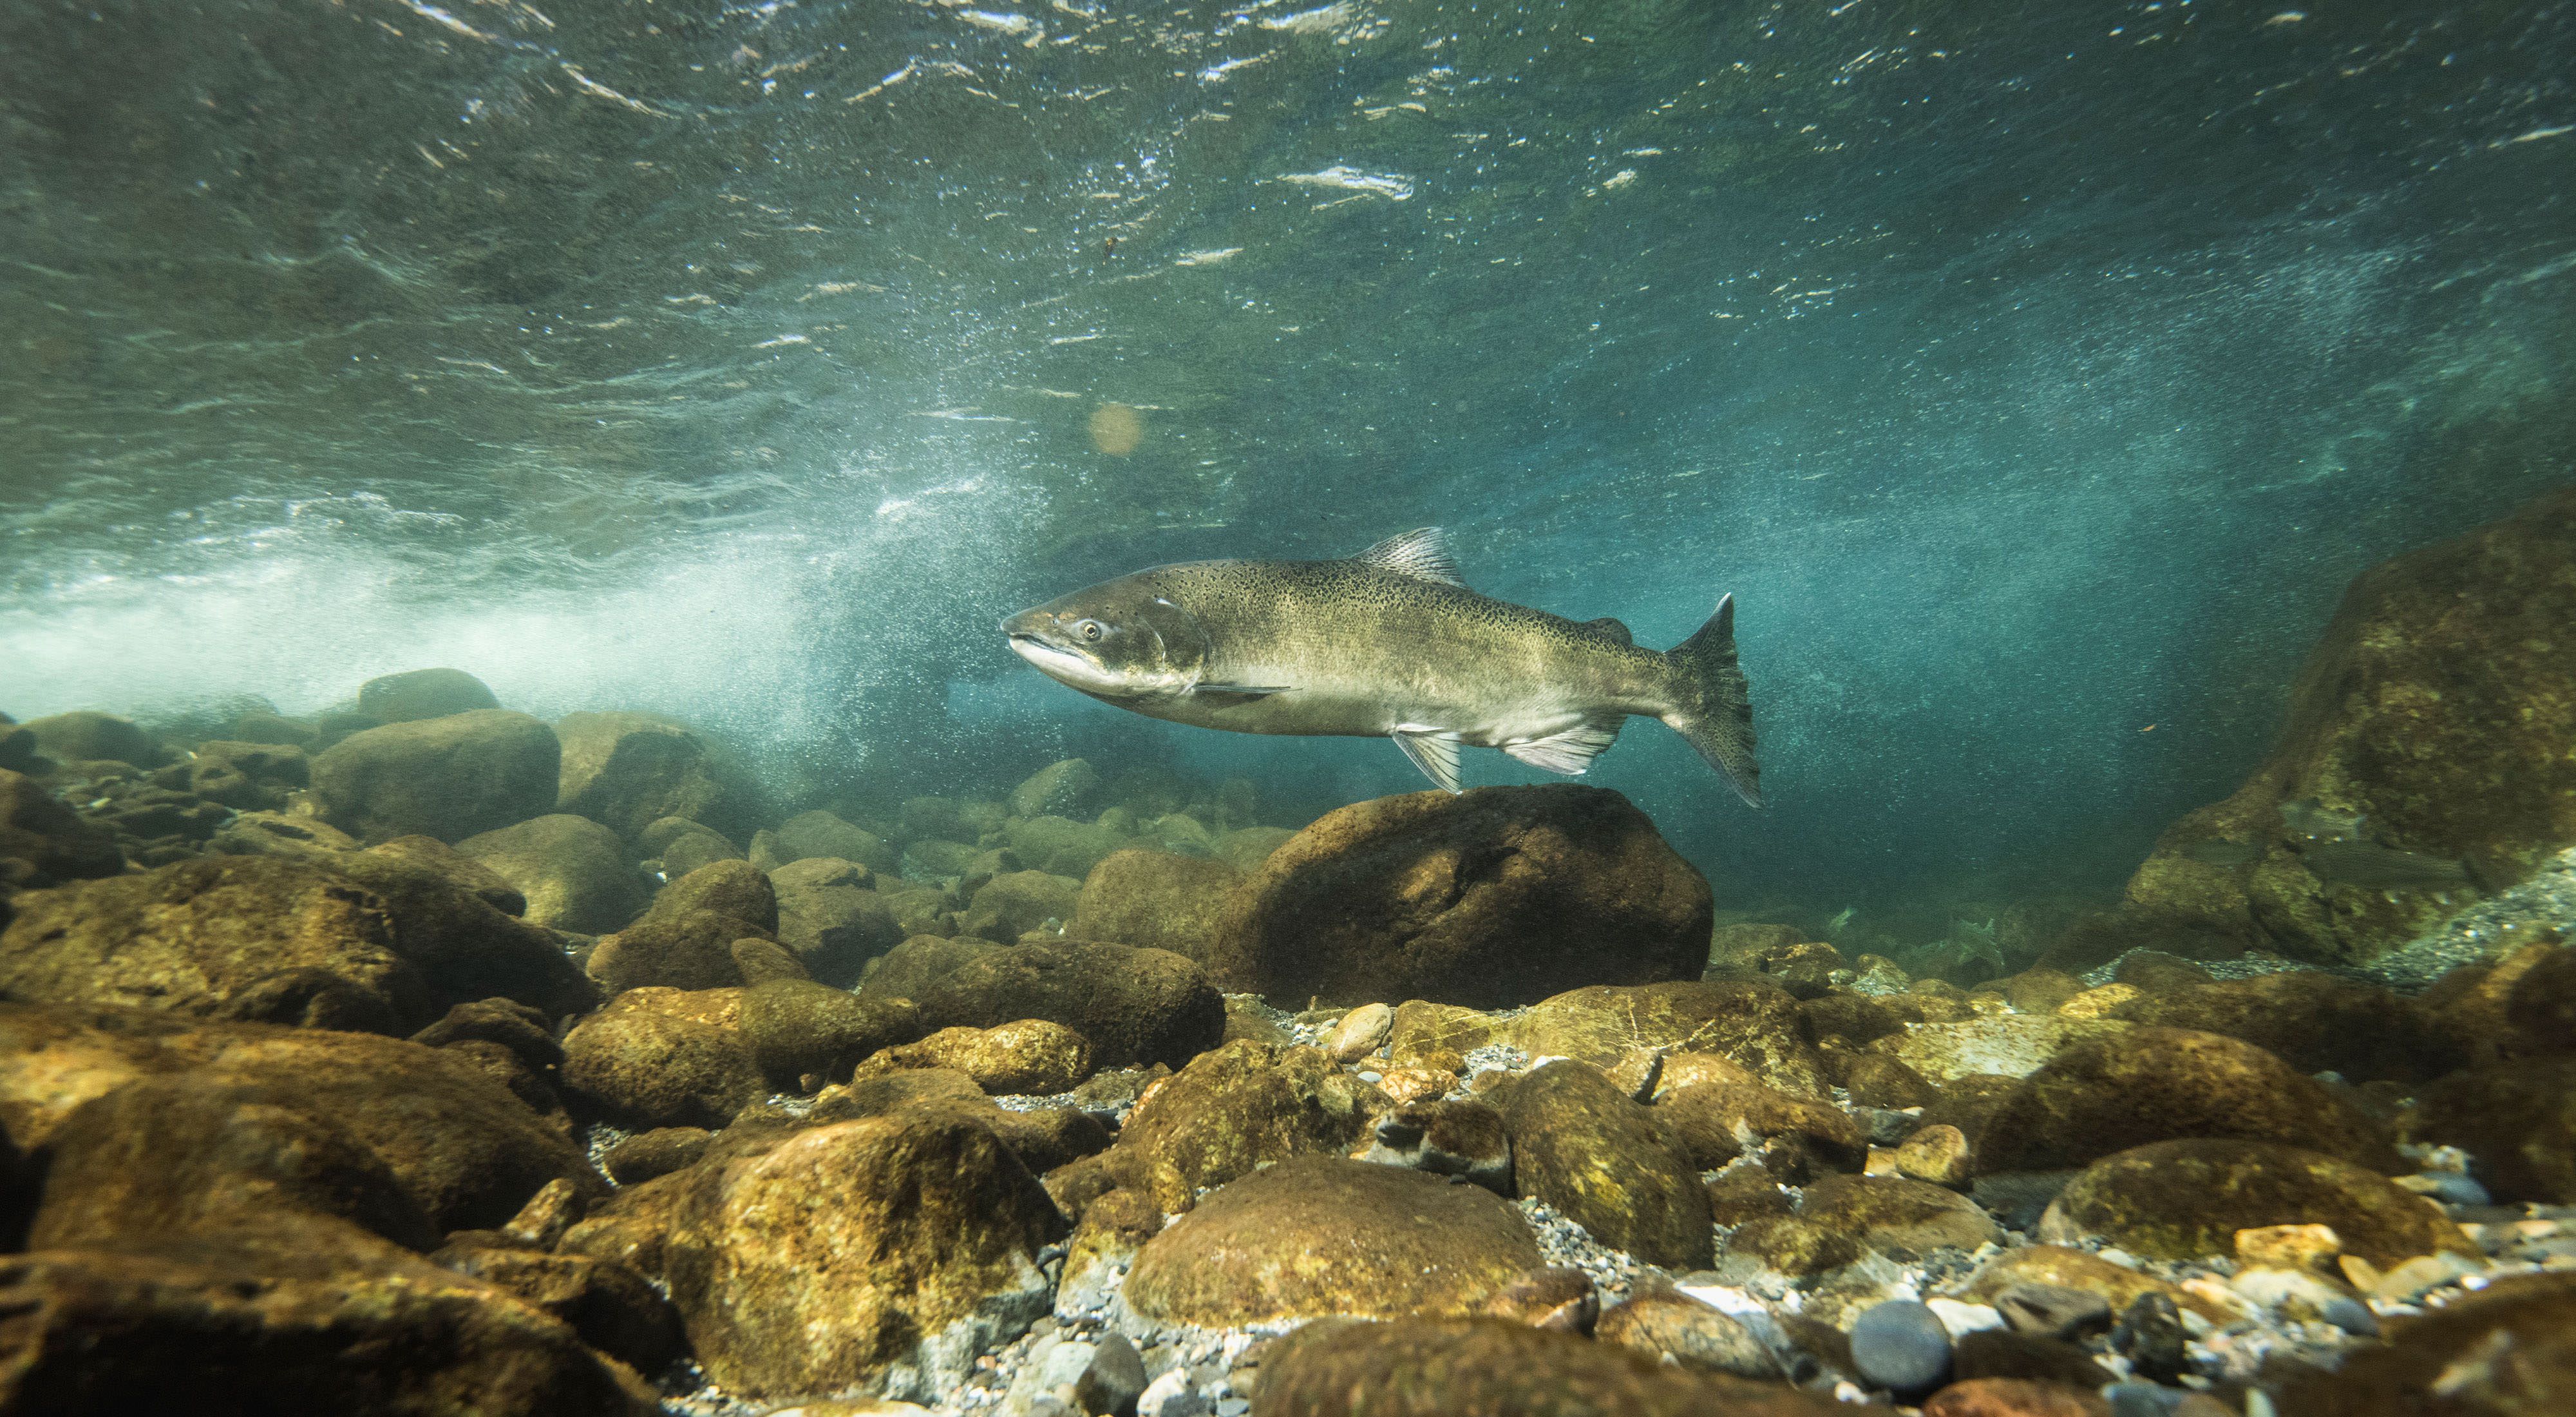 Underwater photo of a chinook salmon (Oncorhynchus tshawytscha in Blue Creek, a tributary of the Klamath River in
northern California.